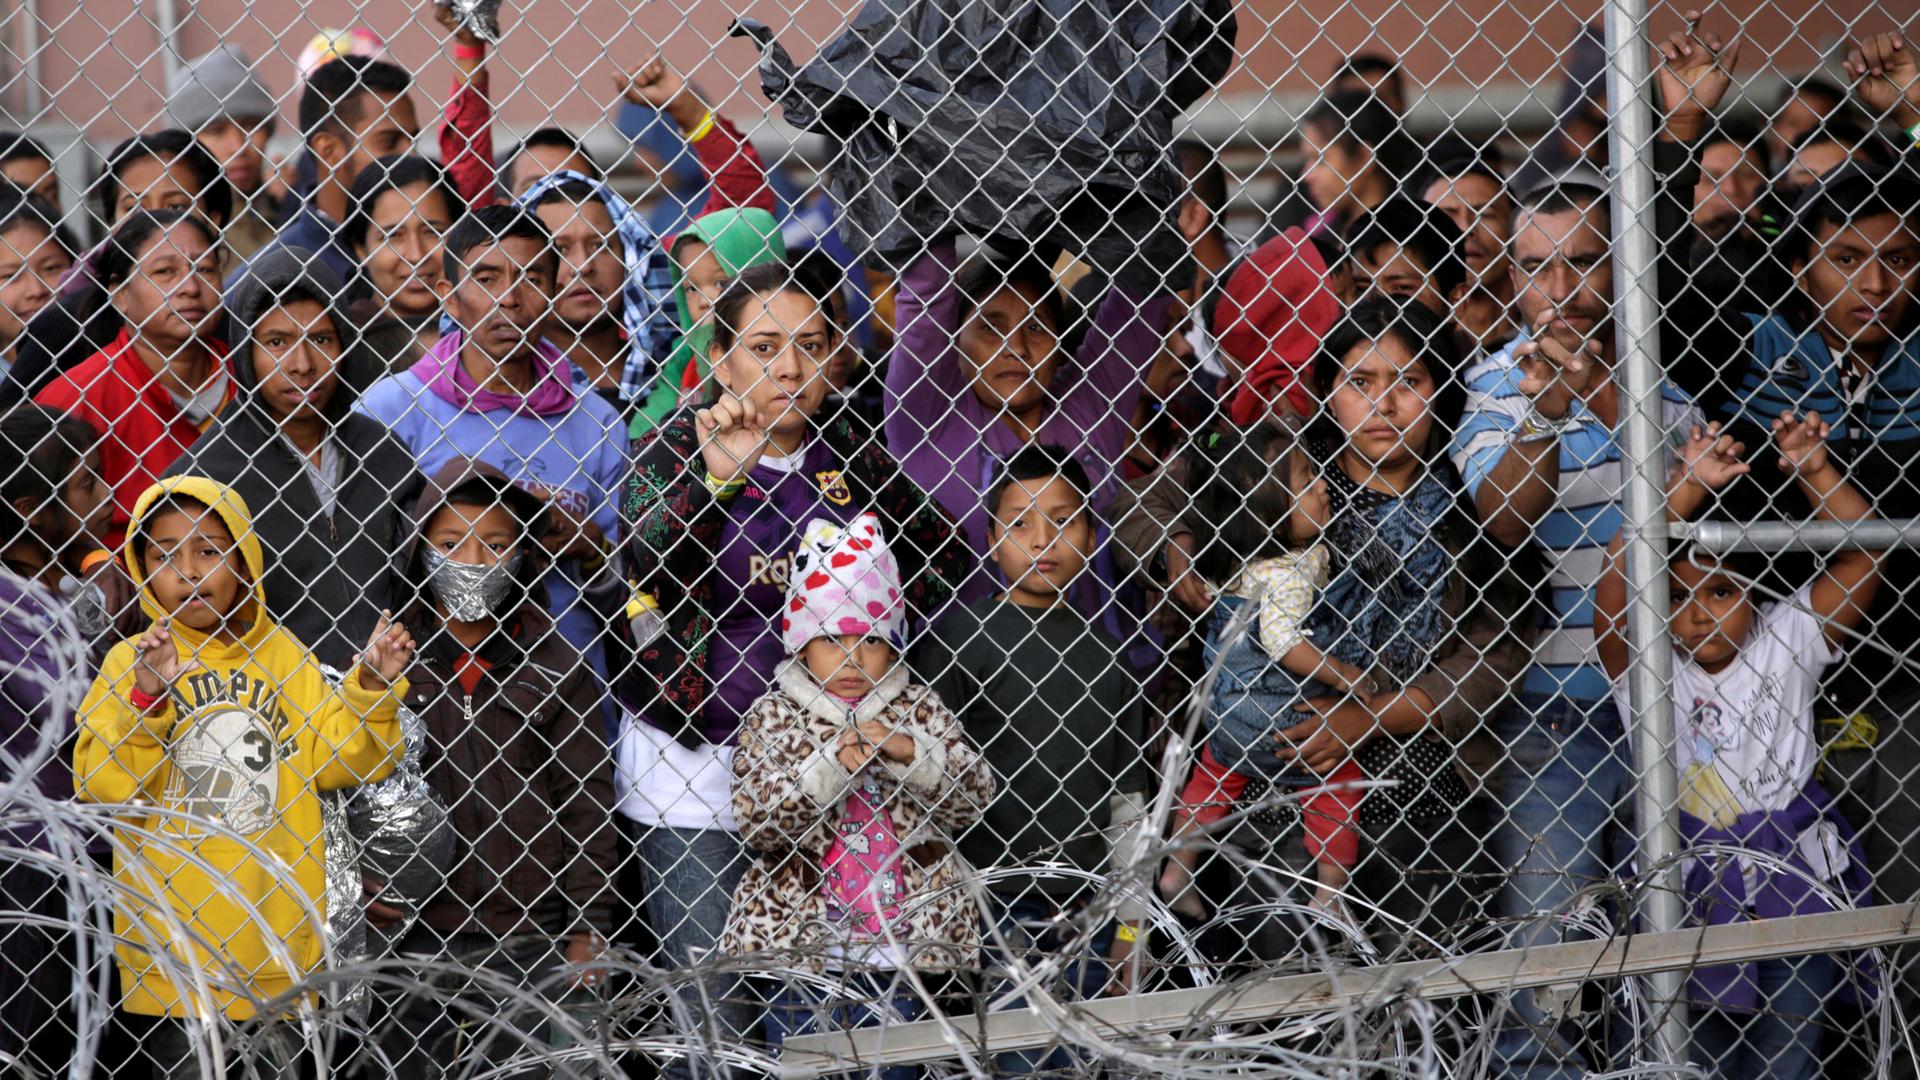 Central American migrants are seen inside an enclosure, behind a chain-link fence, where they are being held by US Customs and Border Protection.